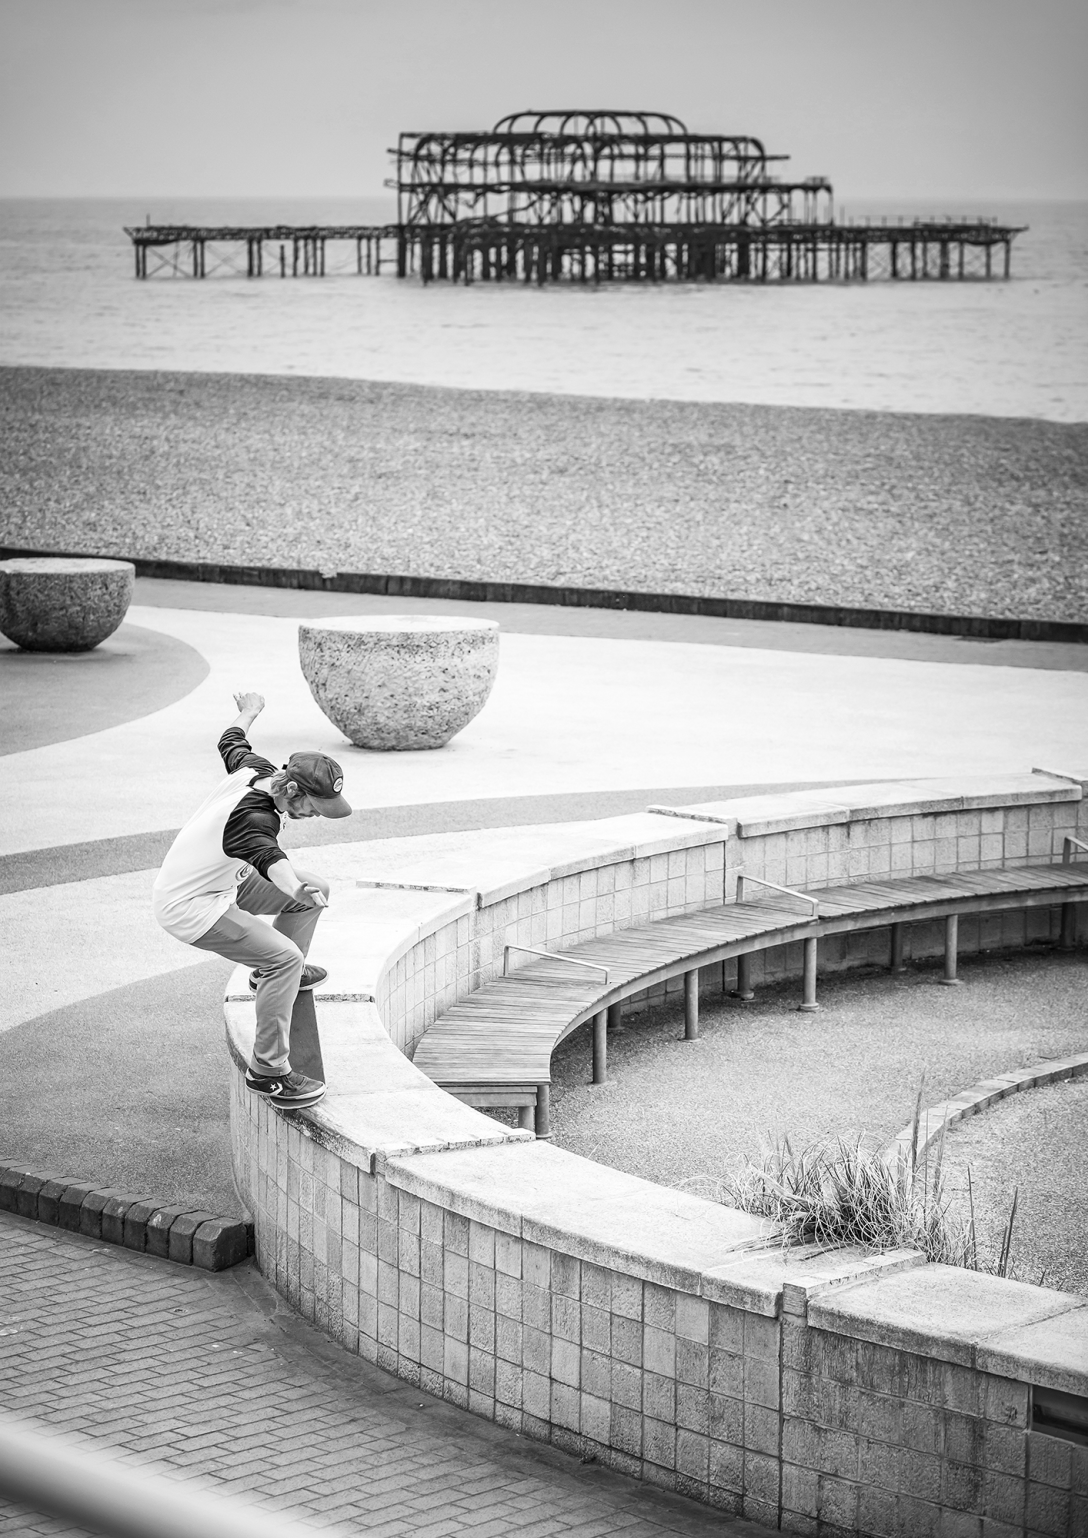 harry-lintell-nosegrind-pop-out-scarborough-real-skateboards-uk-tour-sidewalk-magazine-issue-212-may-2014-photo-chris-johnson